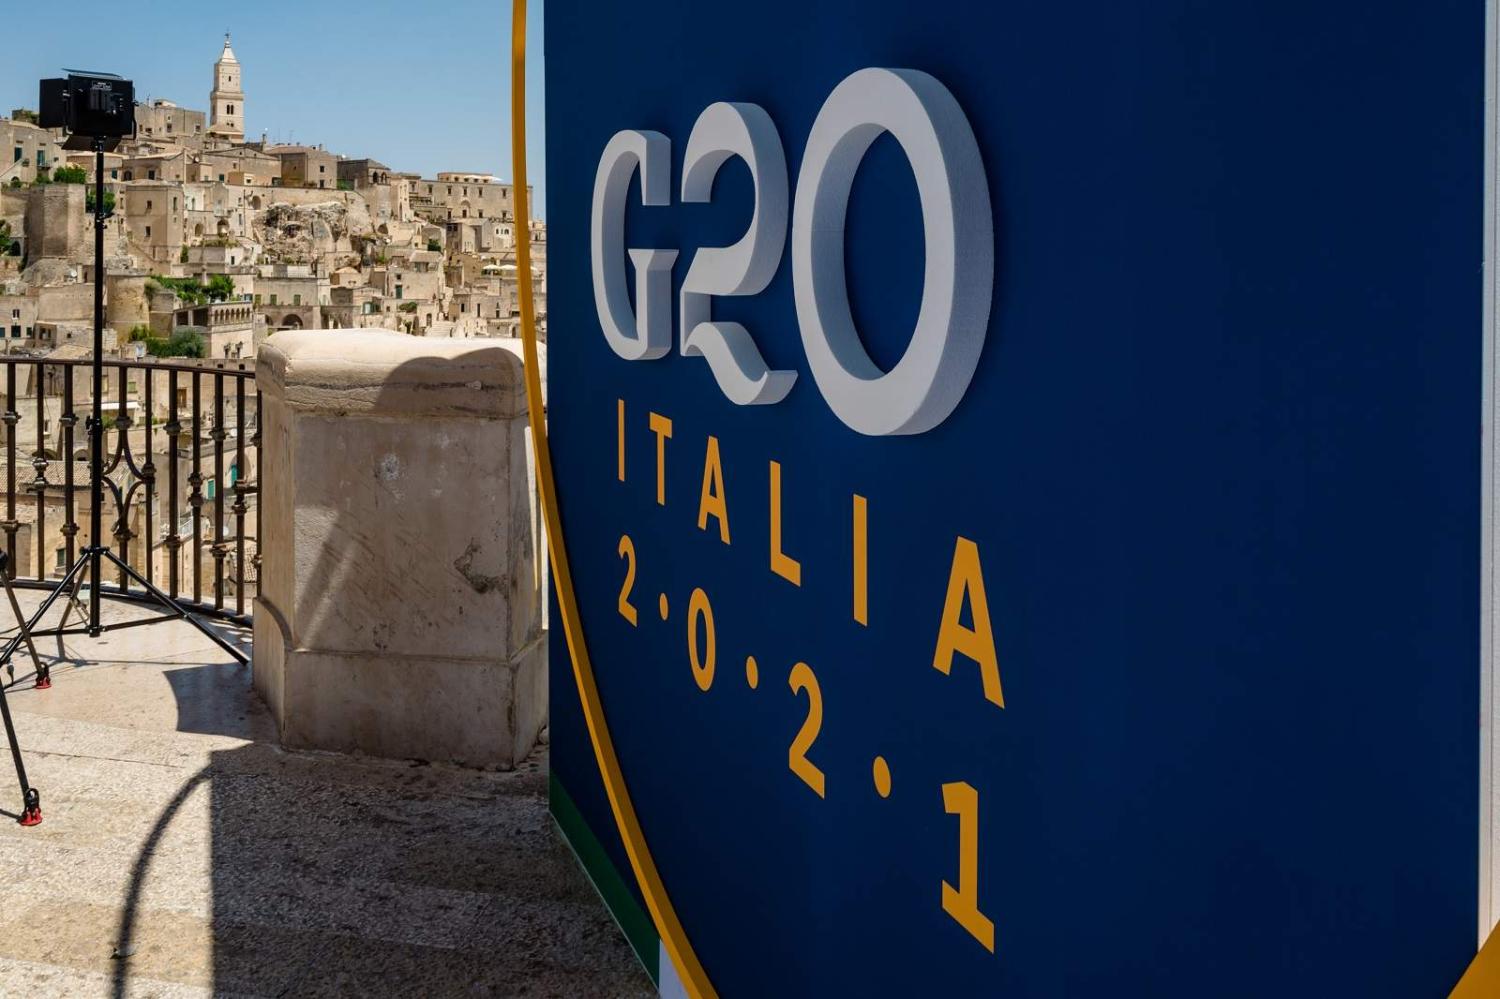 This year's G20 will take place in Rome in October (Davide Pischettola/NurPhoto via Getty Images)